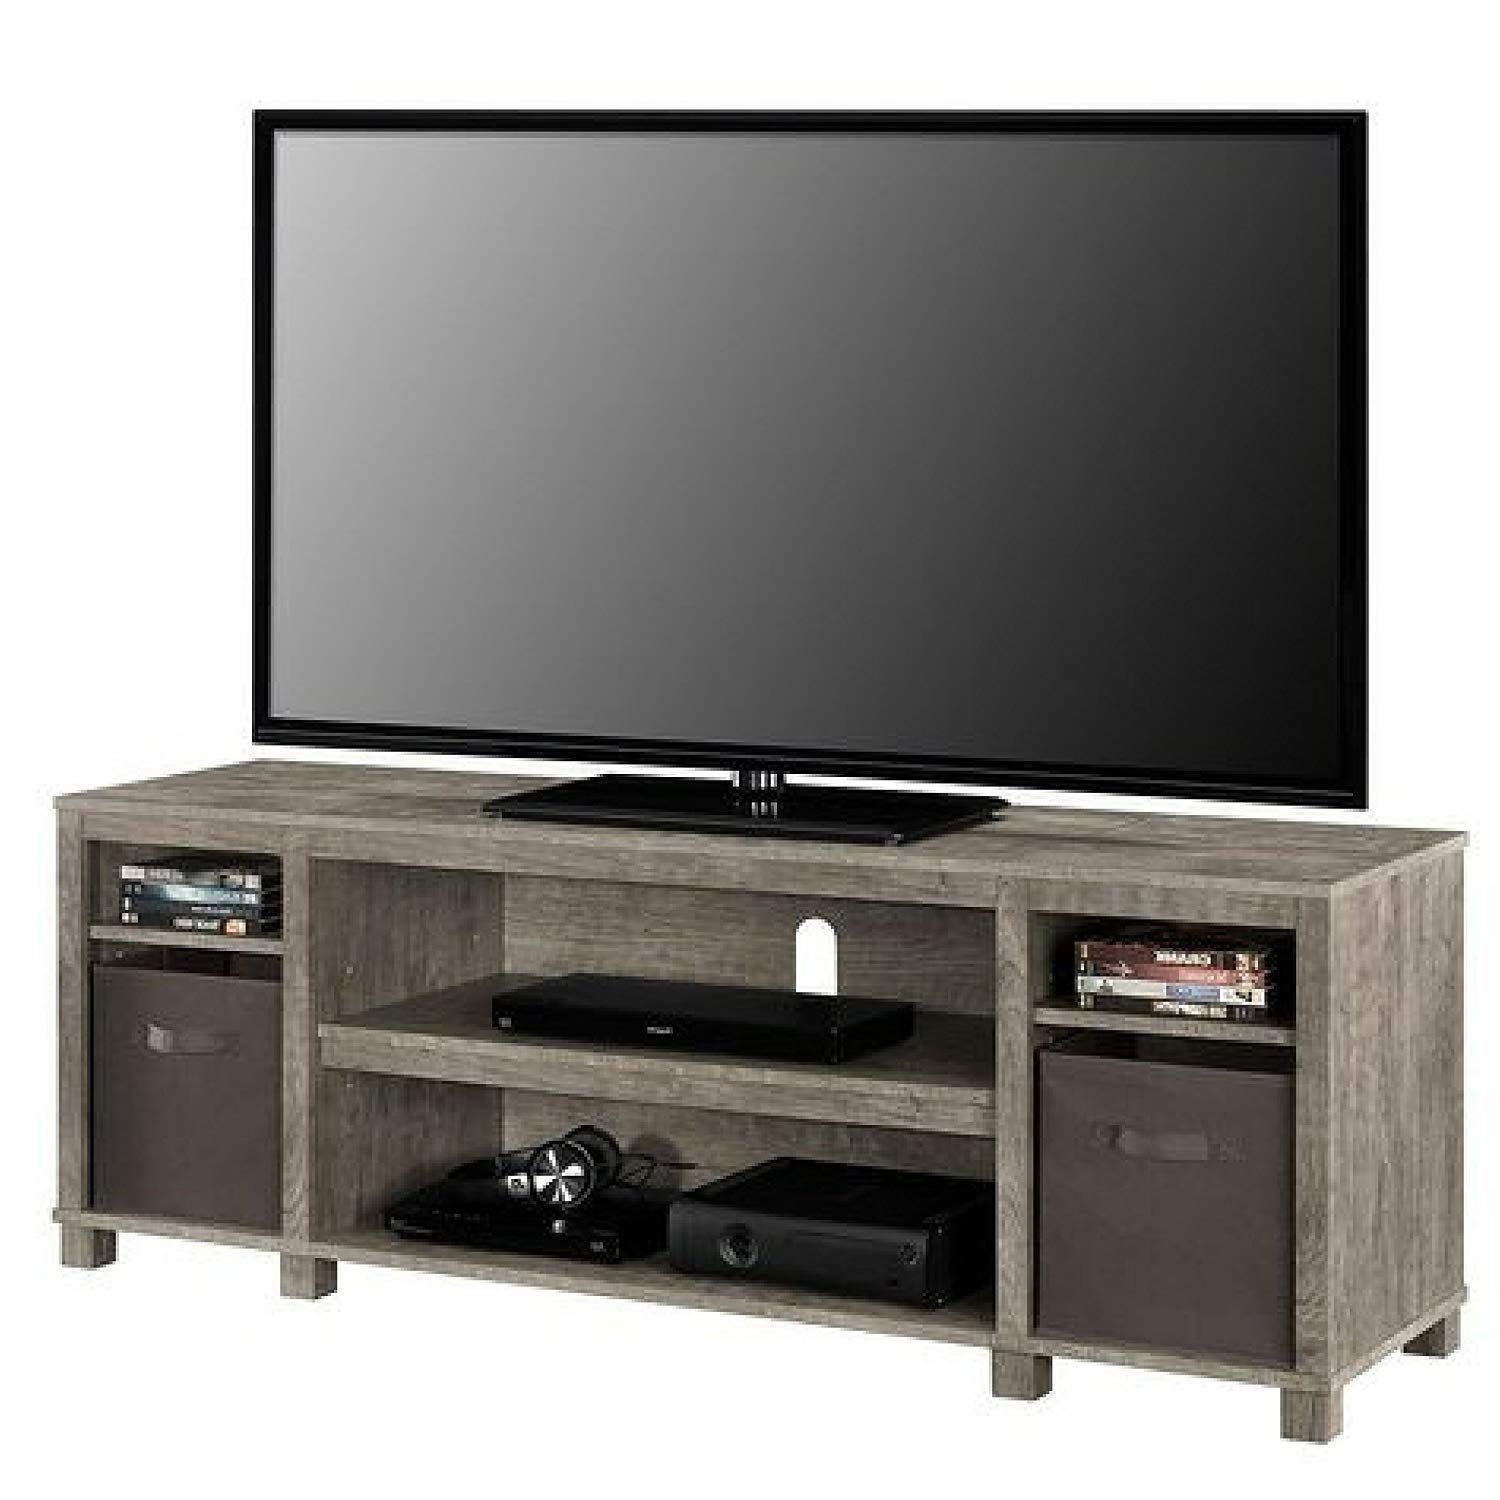 Mainstay Sleek Classic Design 65 Open Shelves Grey Tv Regarding Mainstays Tv Stands For Tvs With Multiple Colors (View 10 of 15)